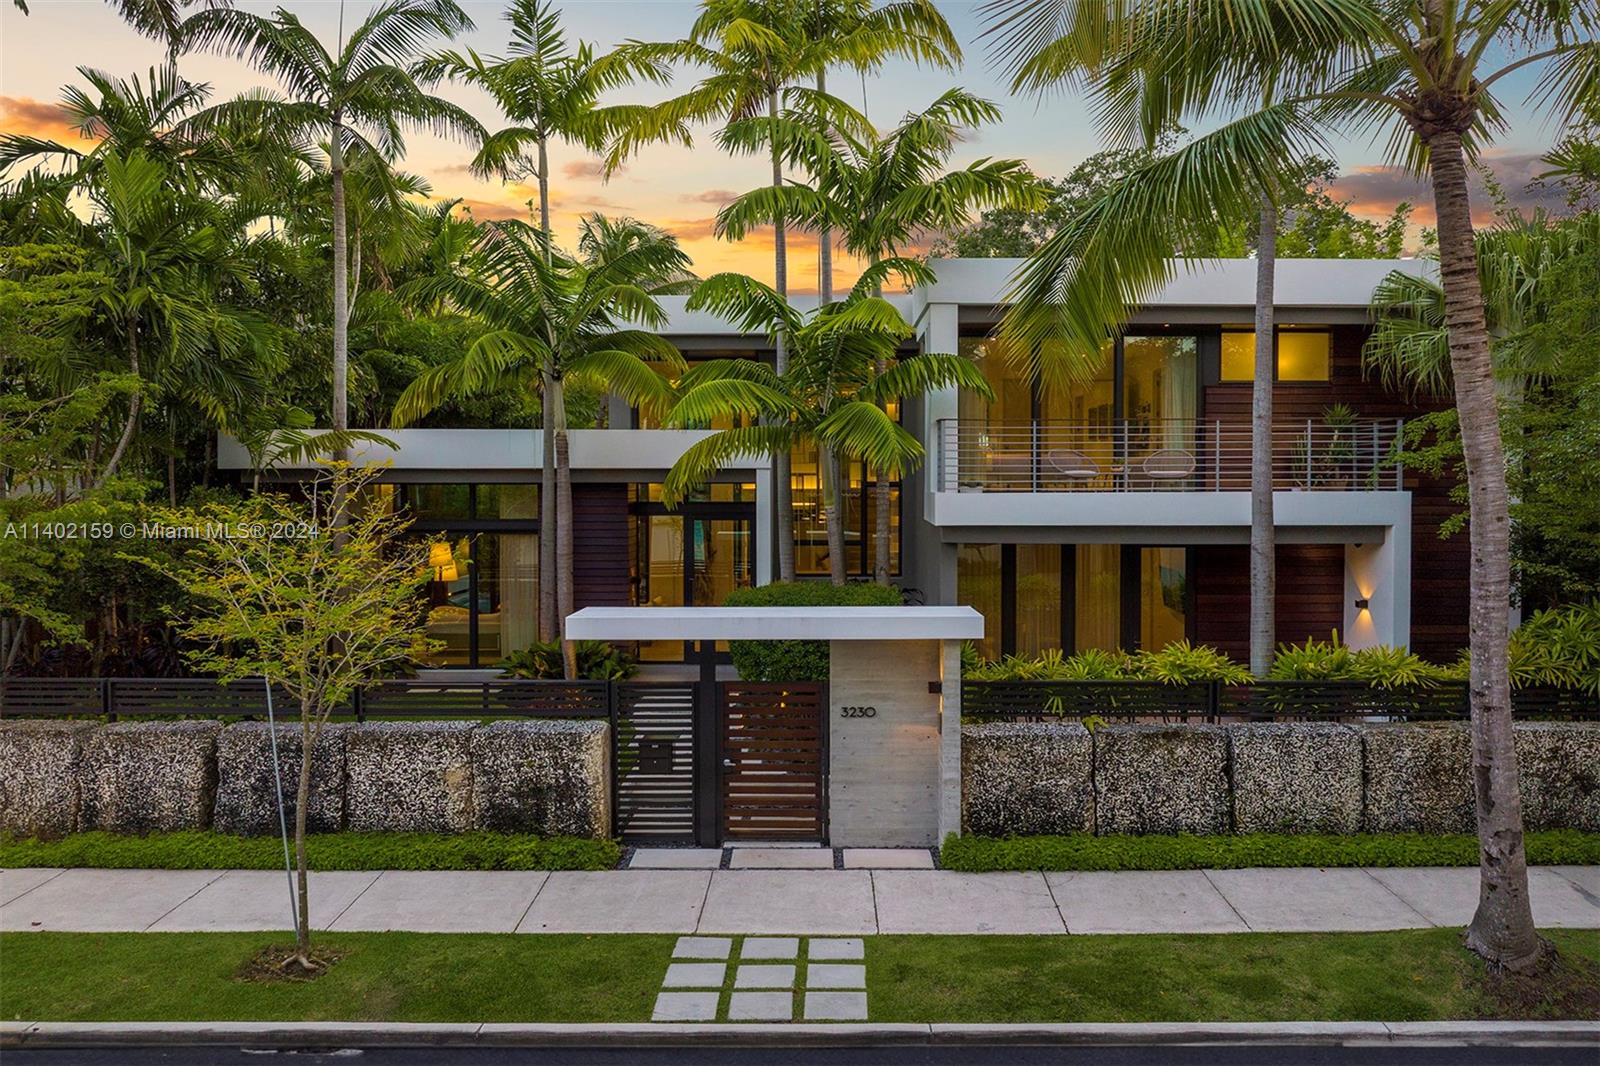 Indulge in the ultimate Coconut Grove lifestyle in this extraordinary modern estate by renowned architect Charles Treister. Perched atop a ridge 21 ft above sea level and surrounded by a lush garden, this unique Tri-Level home seamlessly blends indoor and outdoor spaces for a tranquil tropical experience. Boasting an array of meticulous details and exquisite craftsmanship, you&#039;ll be captivated by a spectacular floorplan with 7 bedrooms and 7/2 bathrooms, rare to find basement w/ A/C, separate guest suite apartment, elevator, and exquisite finishes throughout. Experience an outdoor oasis with glowing pool &amp; spa, covered terrace, summer kitchen and outdoor shower. This modern smart home offers it all with a full house generator, 2 car garage in desirable North Grove and prestigious schools.